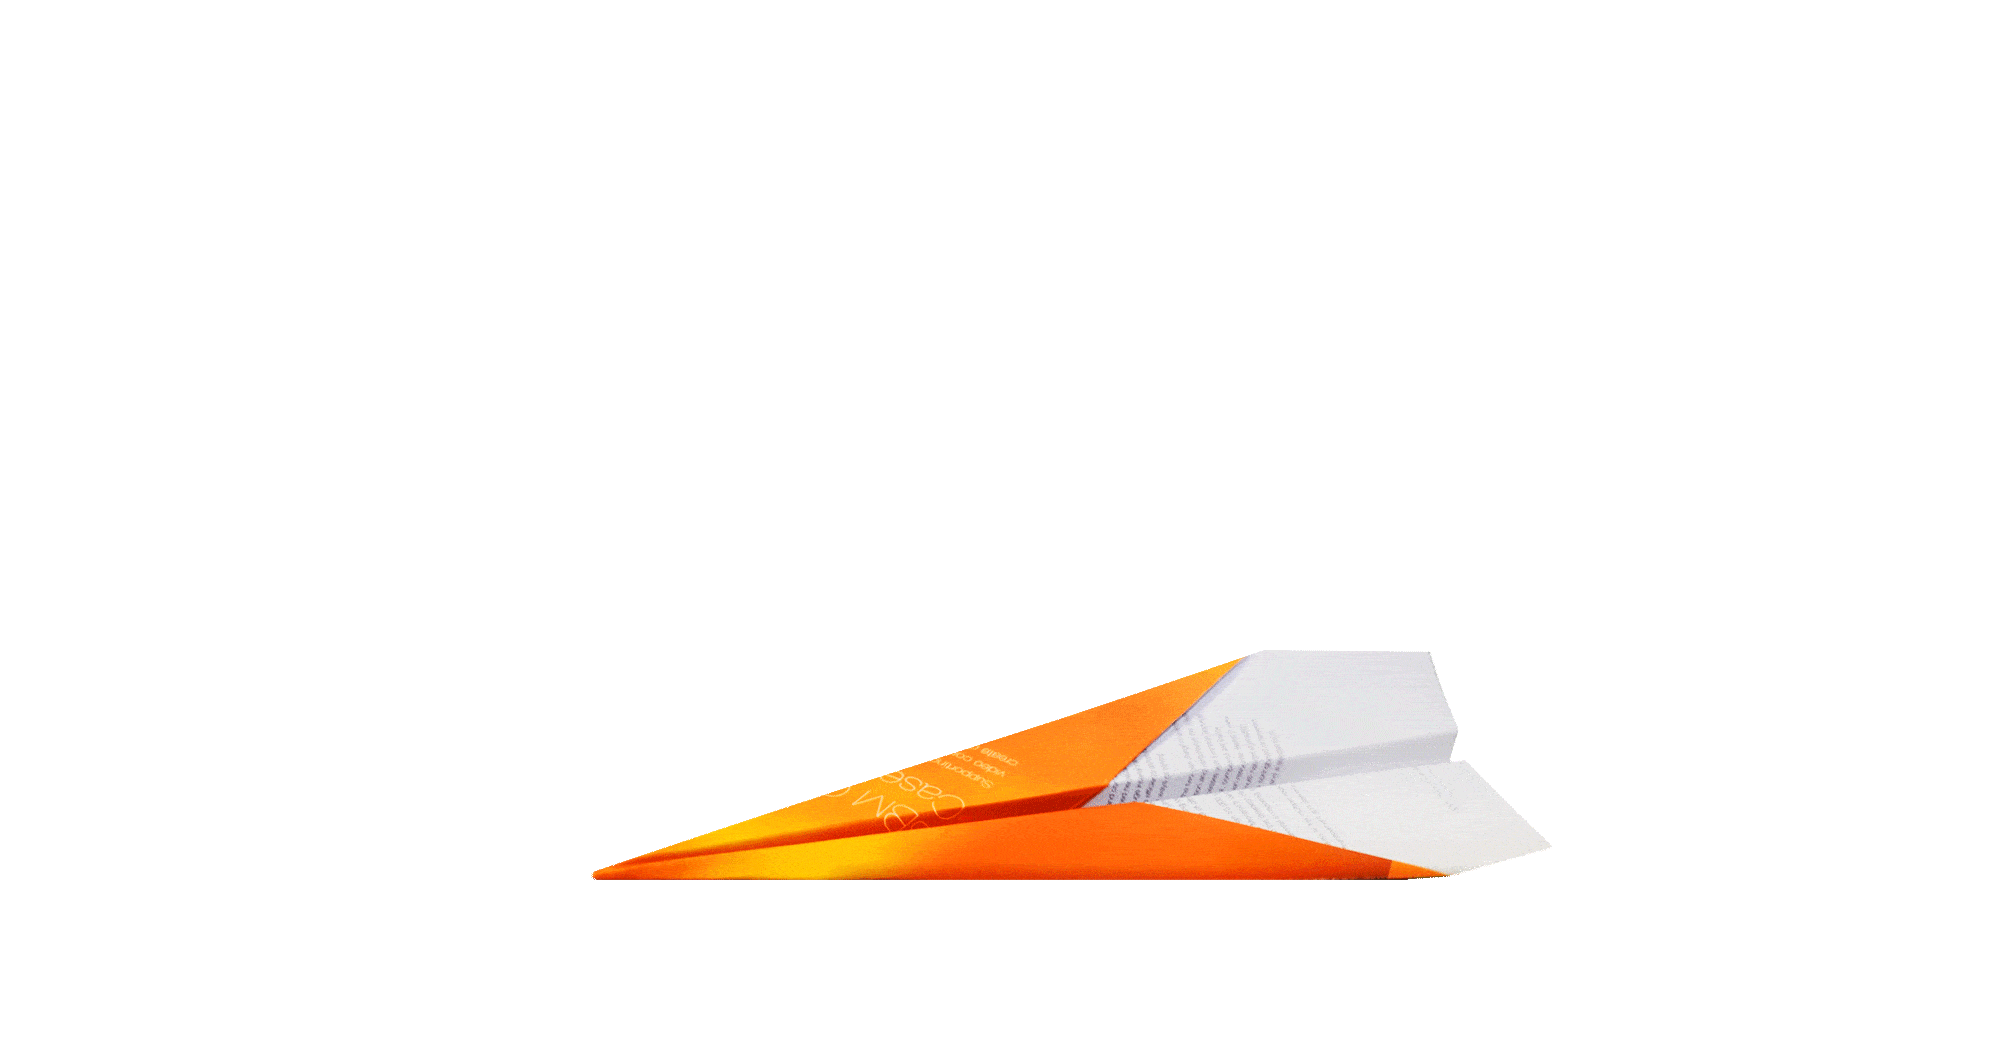 Animated paper plane made from marketing literature.